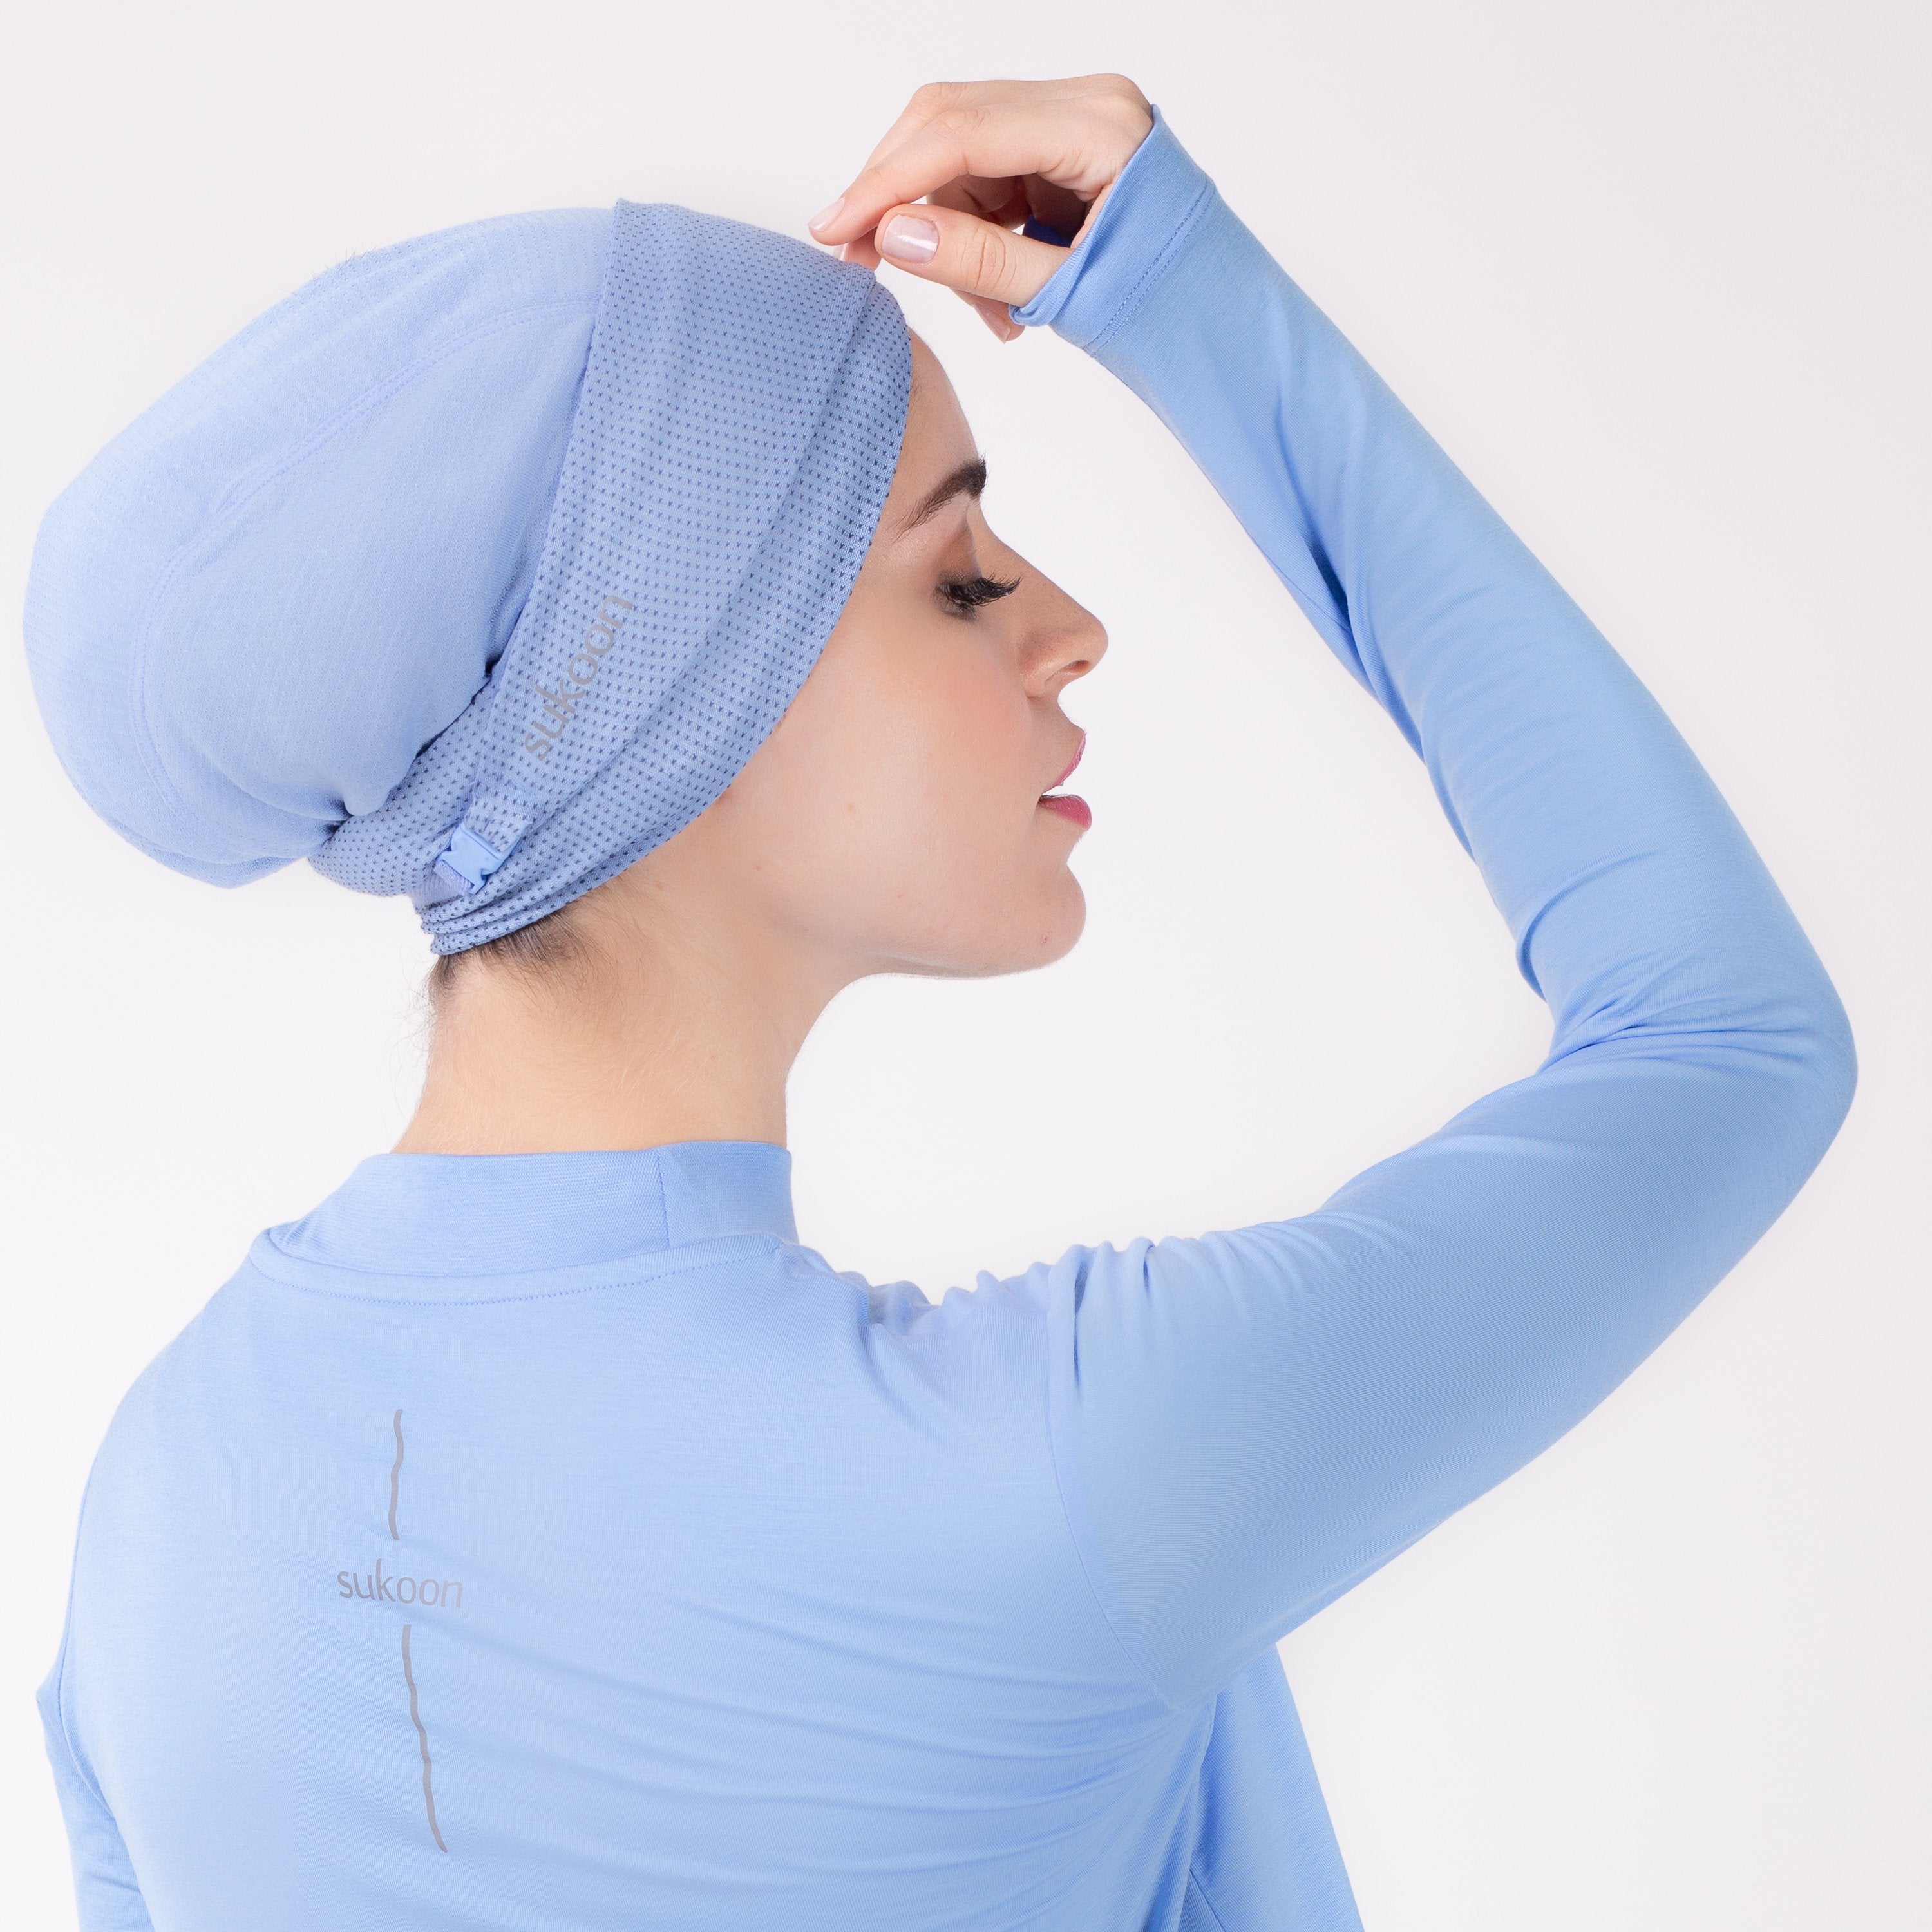 Right detail of woman in a sky blue shirt with matching sky blue HAWA headwrap with hand touching forehead.